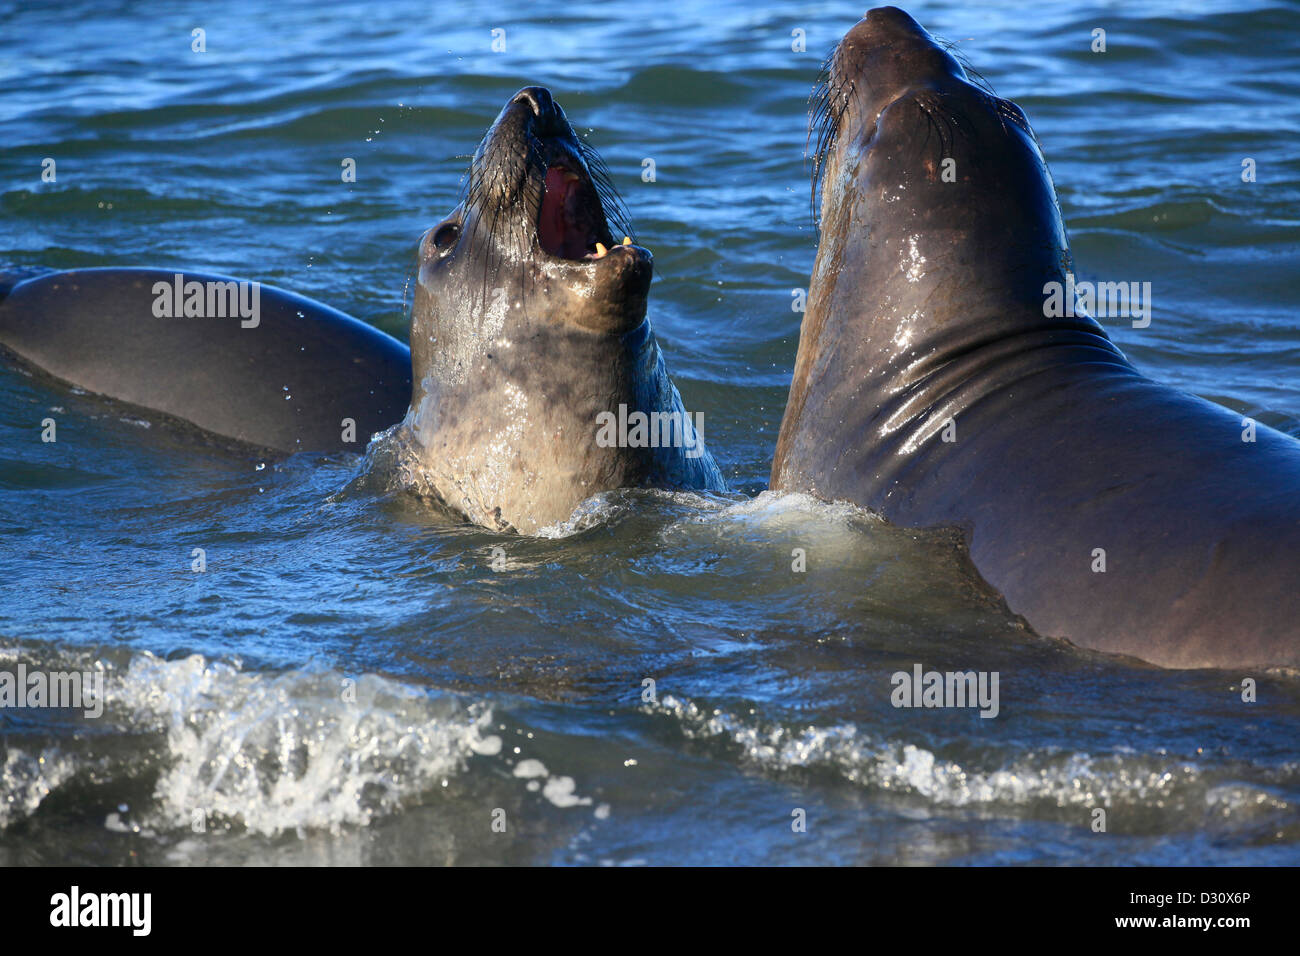 A pair of male elephant seals fight in the surf at the Ano Nuevo rookery in northern California. Stock Photo